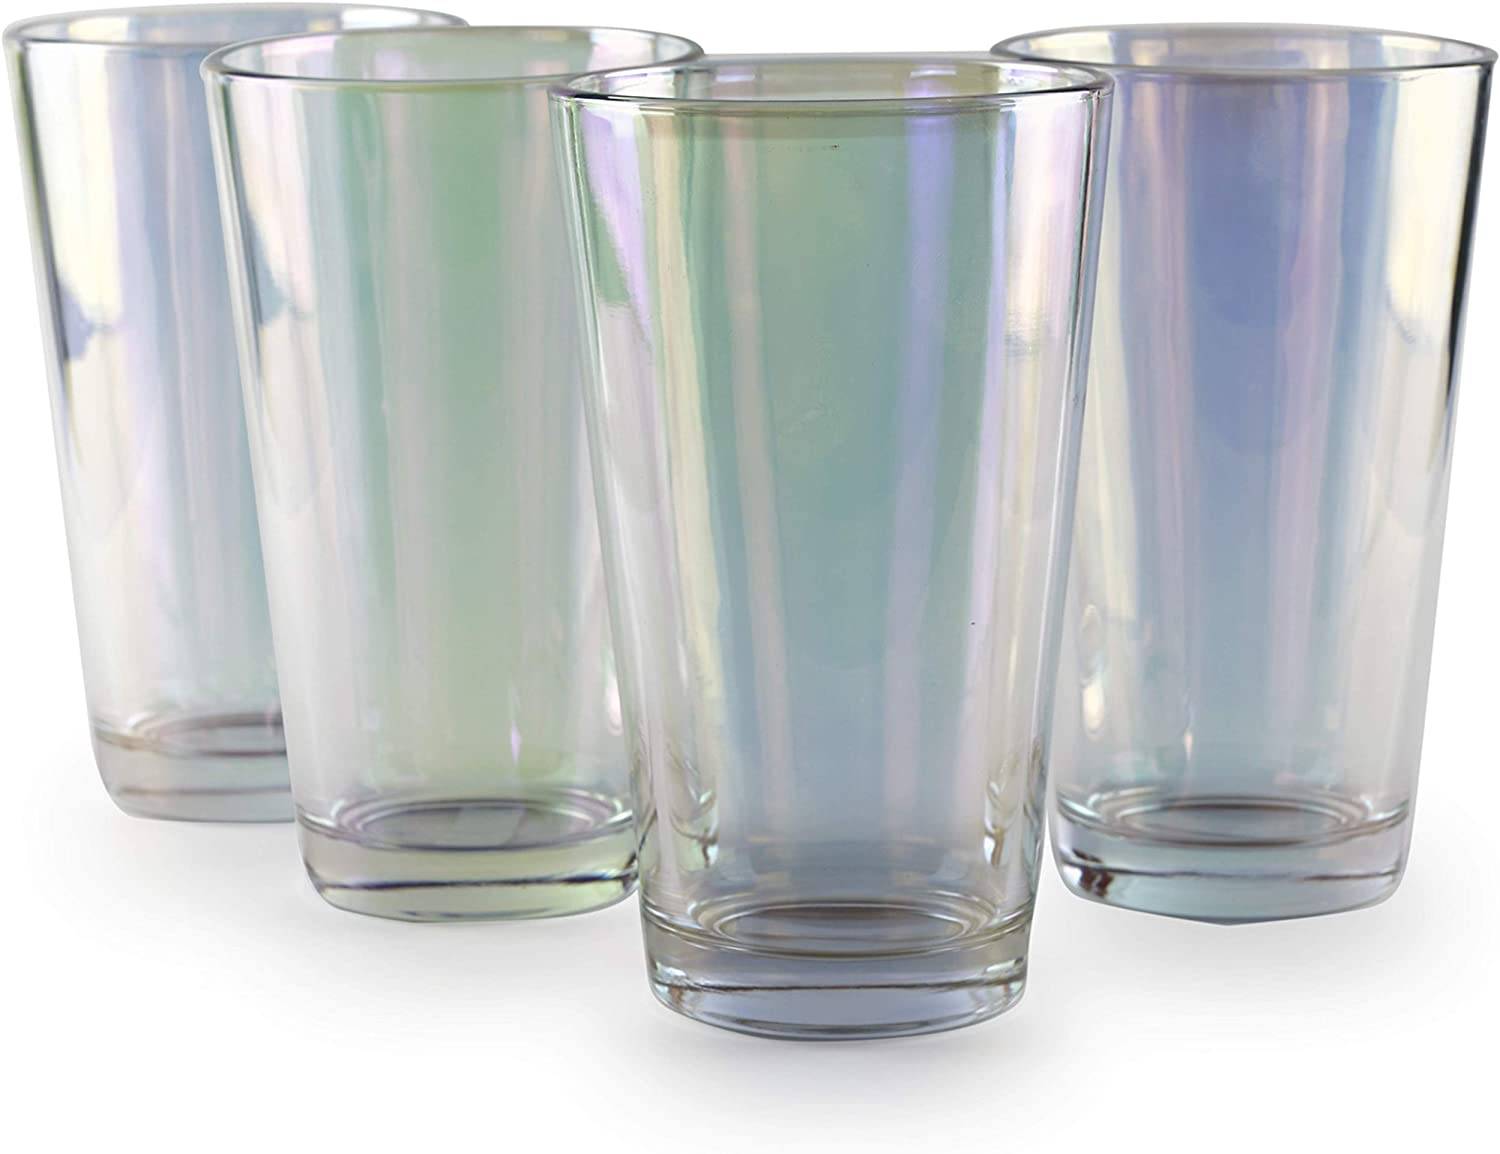 Circleware Radiance Set of 4 Heavy Base Highball Cooler Drinking Glasses Beverage Tumbler, 15.75 oz, Cups for Water, Juice, Milk, Beer, Ice Tea and Farmhouse Decor, 4 Count (Pack of 1) - Hatke